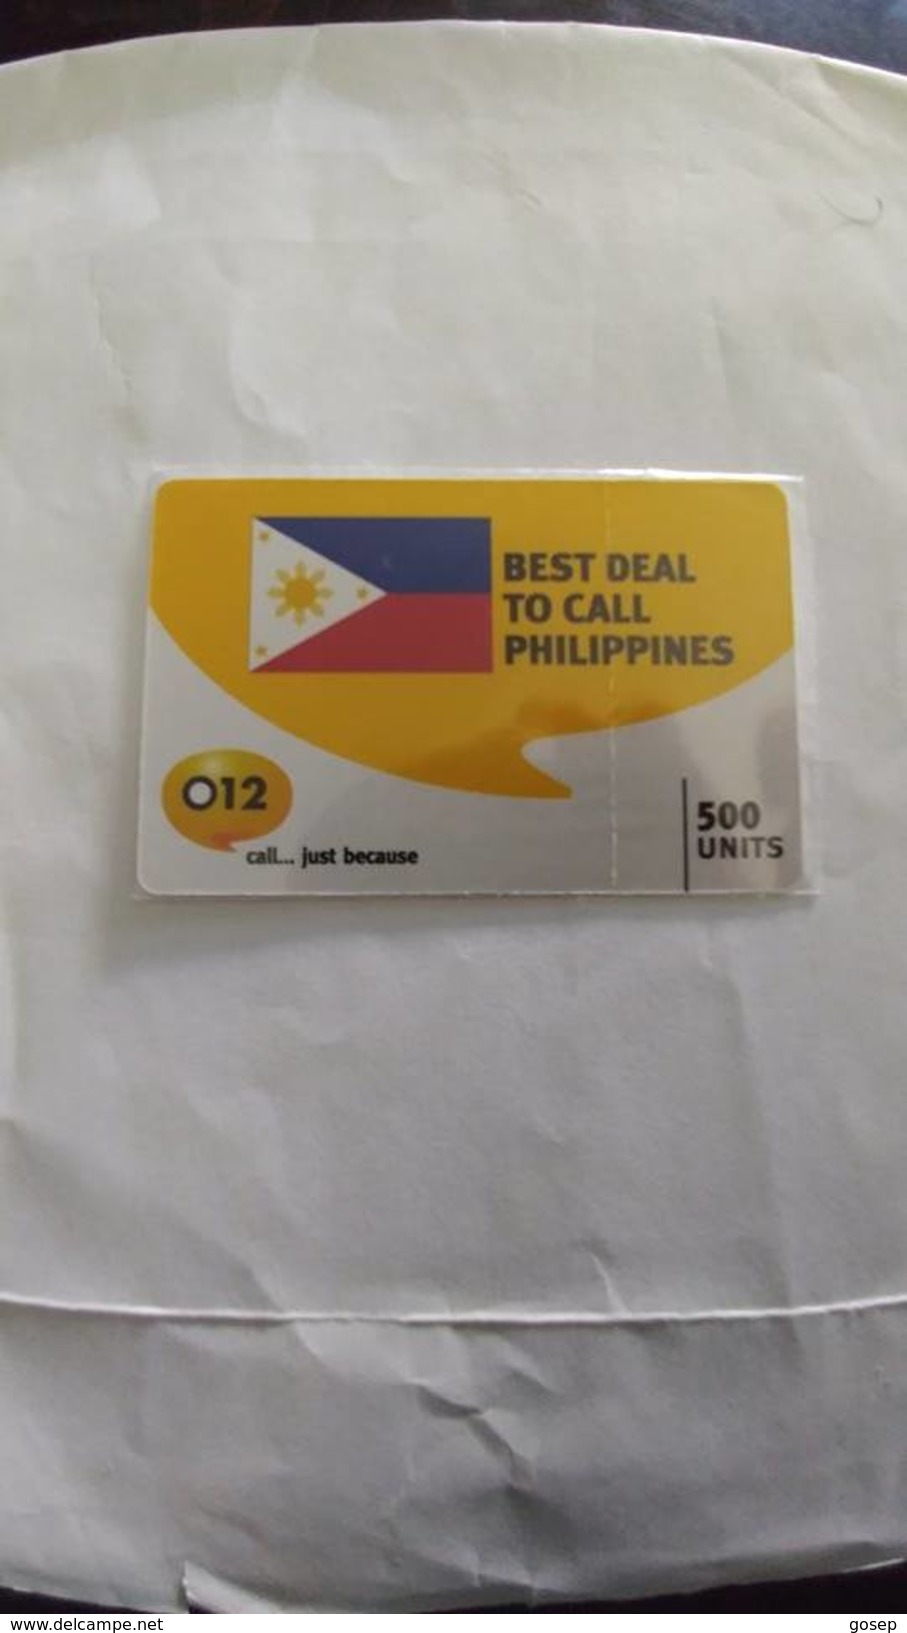 Israel-best Deal To Call Philippines-(4)-flag-(500units)-(012call Just Because)-(5.3.2008)-mint Card - Philippinen